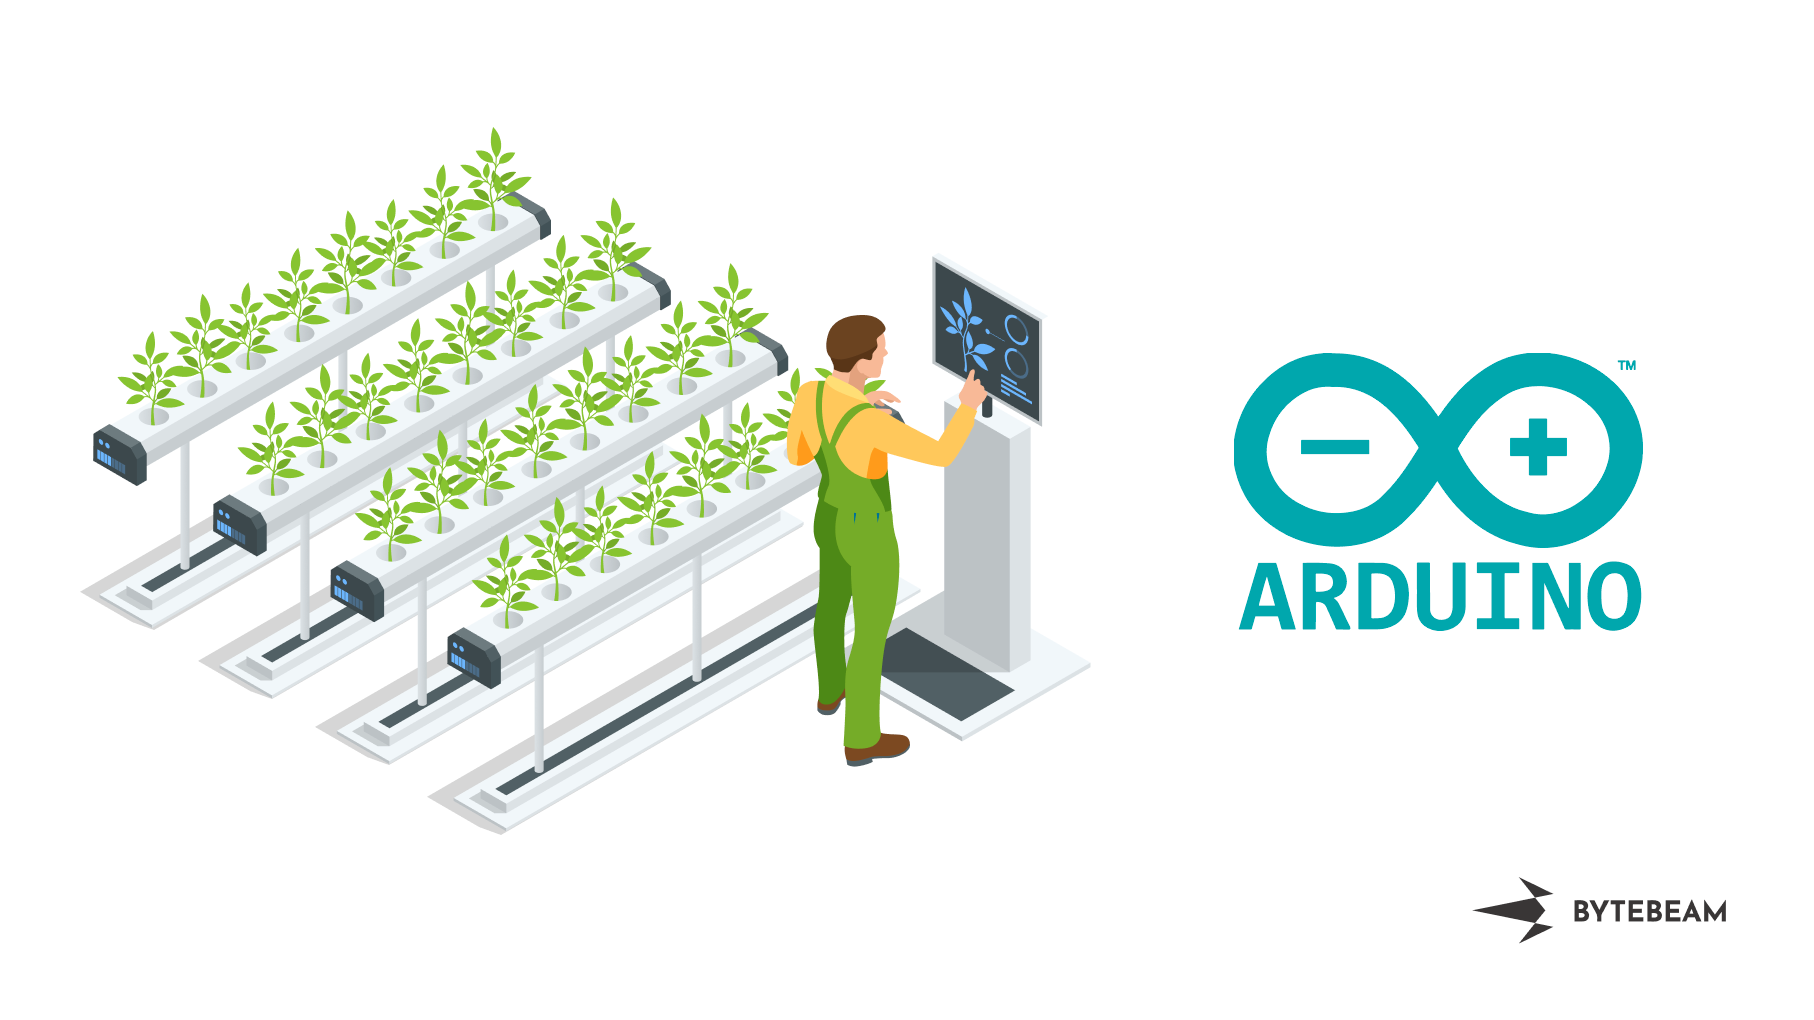 Smart indoor farming using Bytebeam SDK for Arduino: Analyzing CO2, Temperature, Humidity and Automated lighting systems